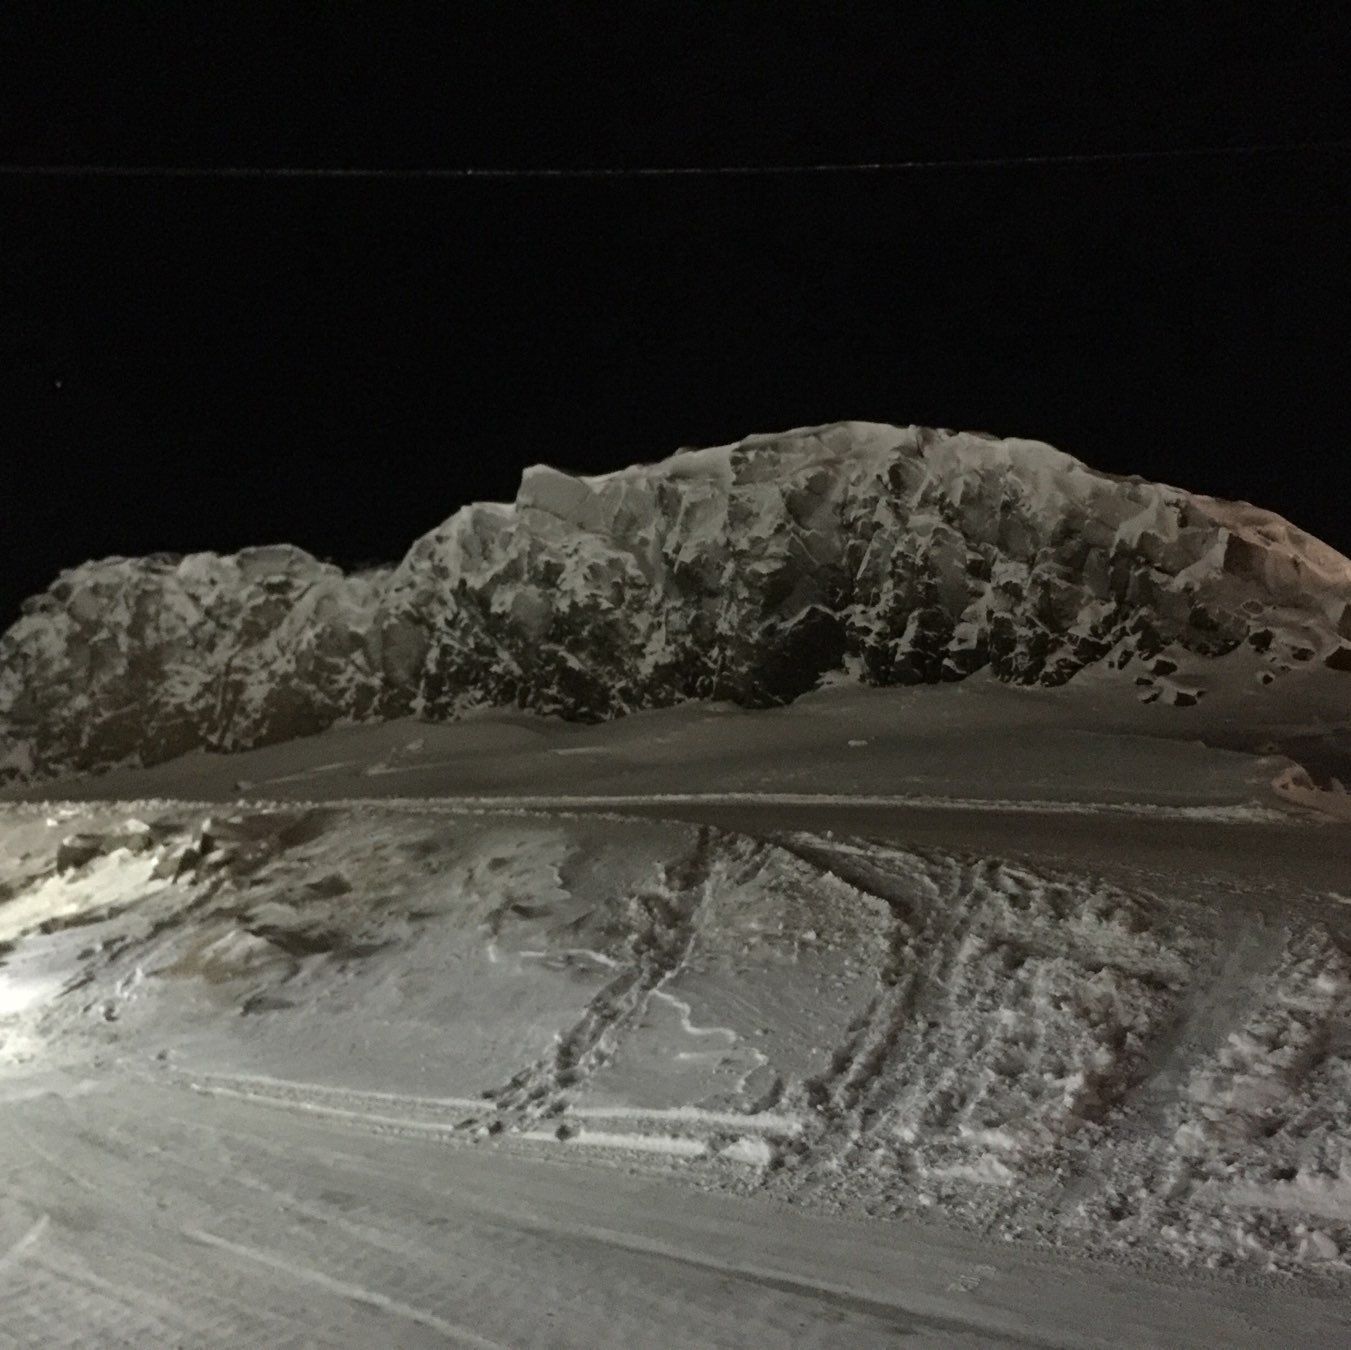 snow-covered rock monolith at night